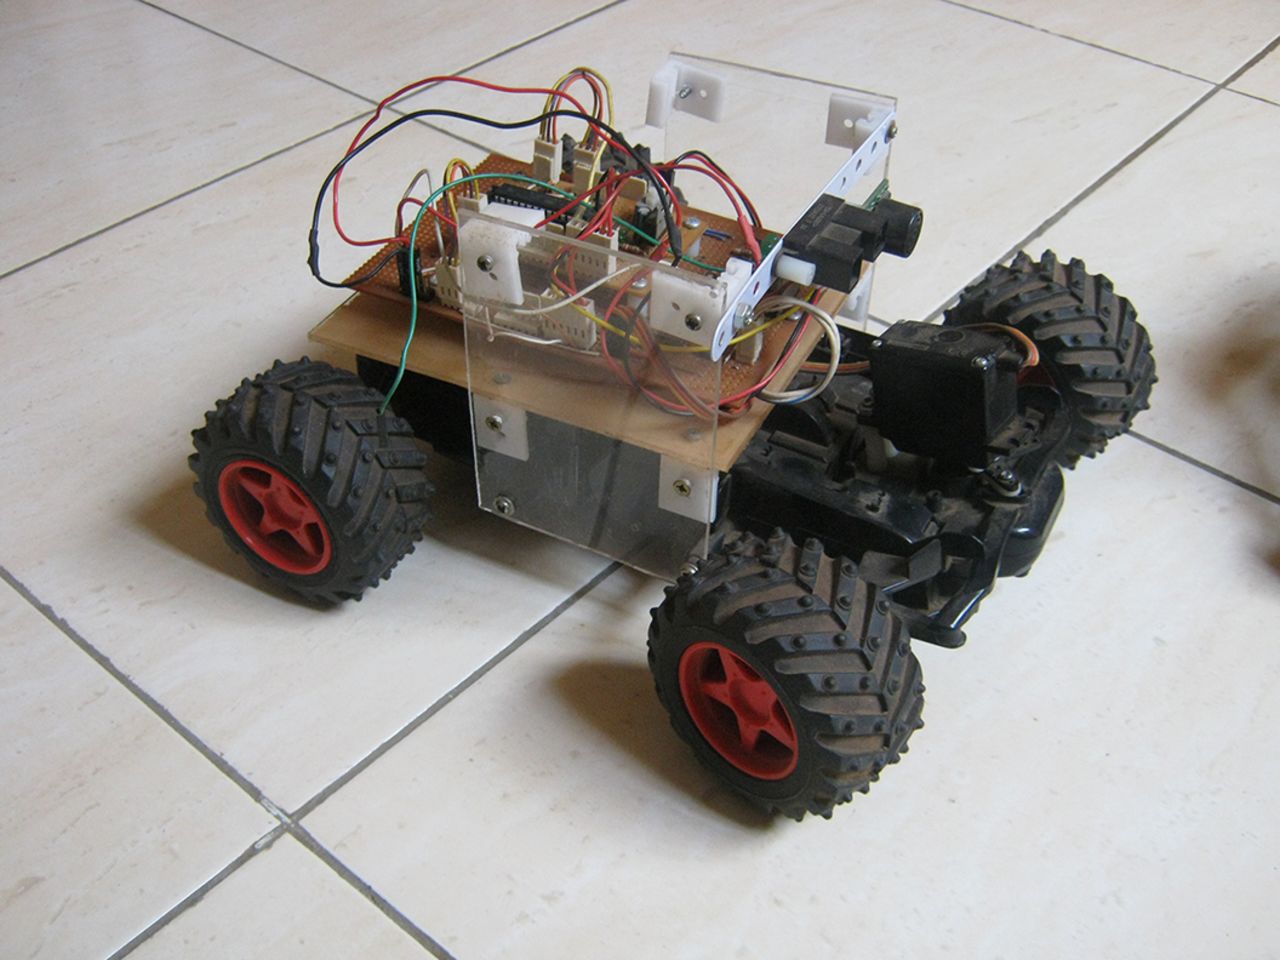 The Rover Mark II is an exploratory vehicle. When Fundi Bots sessions are held in schools, demonstration models like this one are used to inspire students to create a robot.